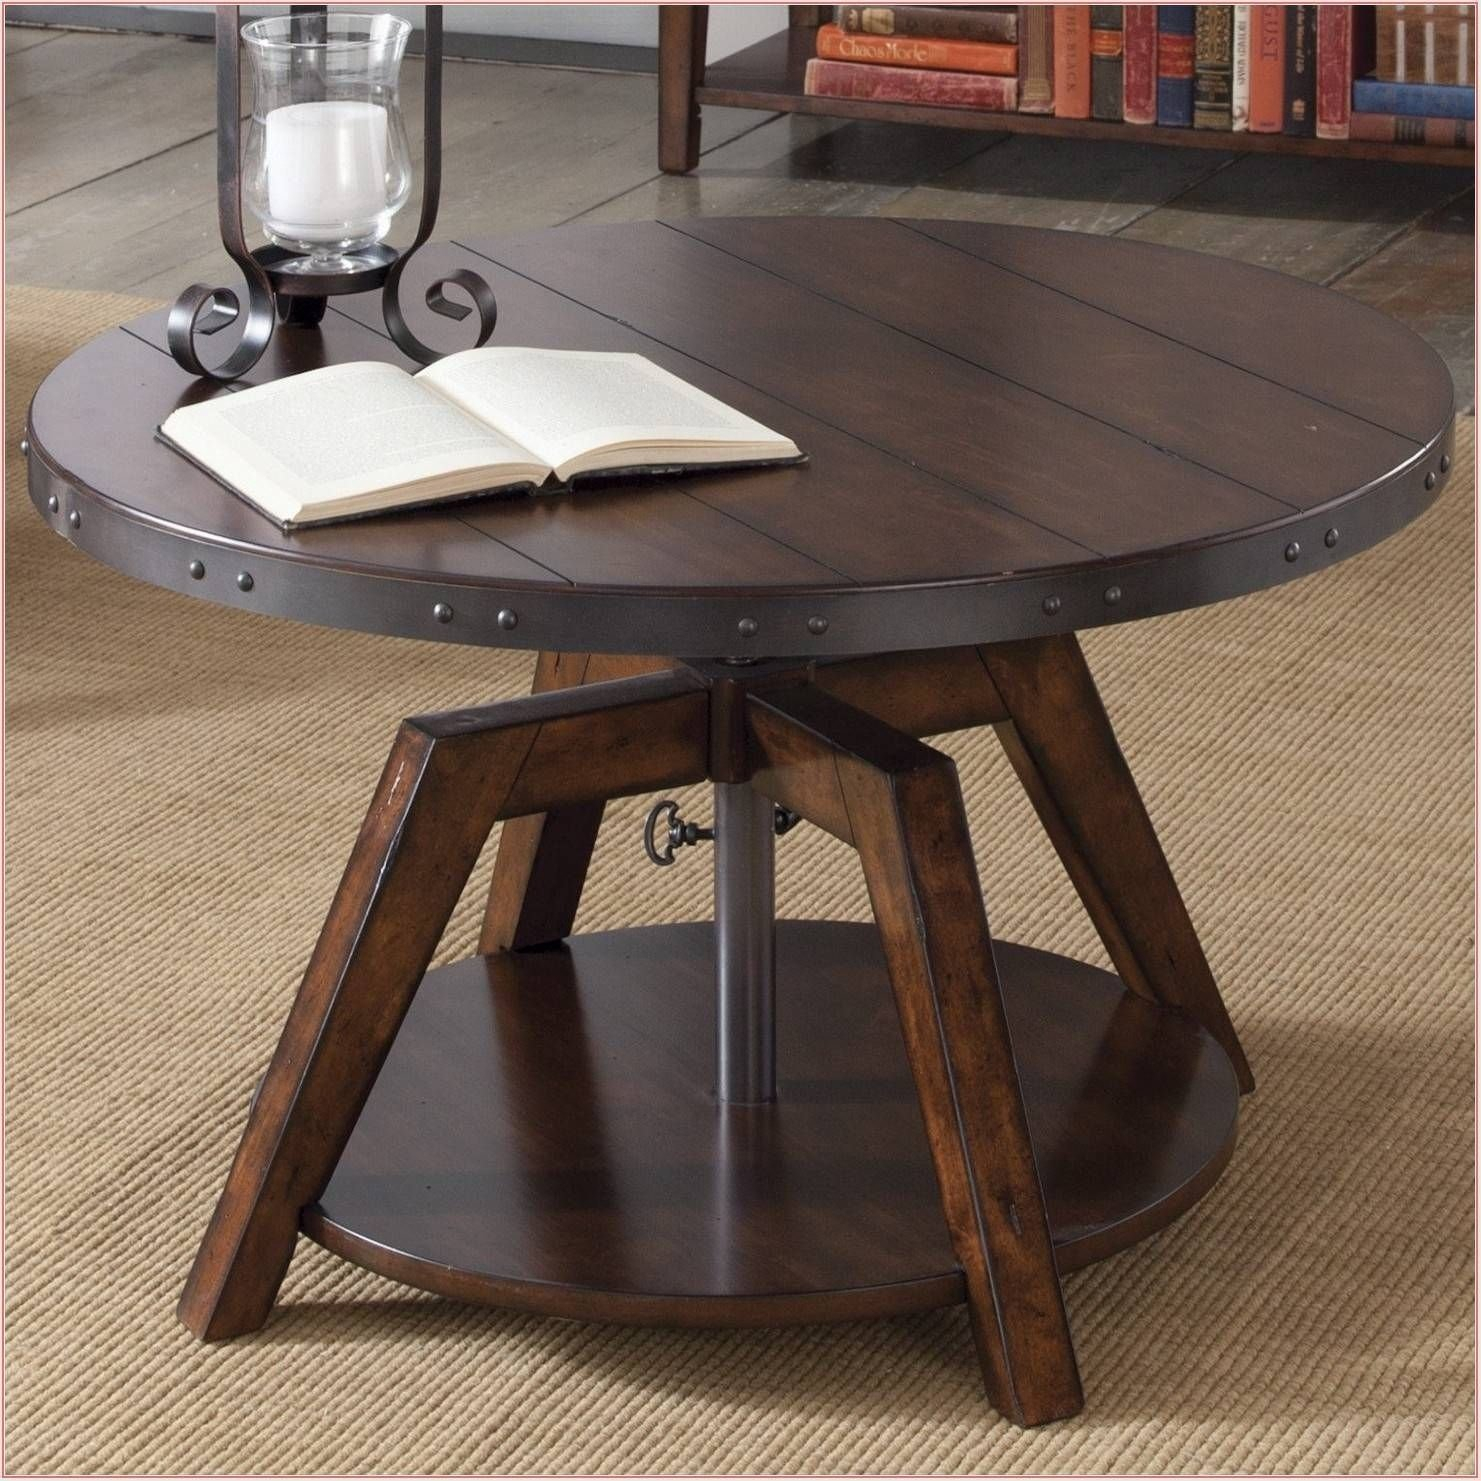 50 Amazing Convertible Coffee Table To Dining Table Up To 70 Off with proportions 1481 X 1481